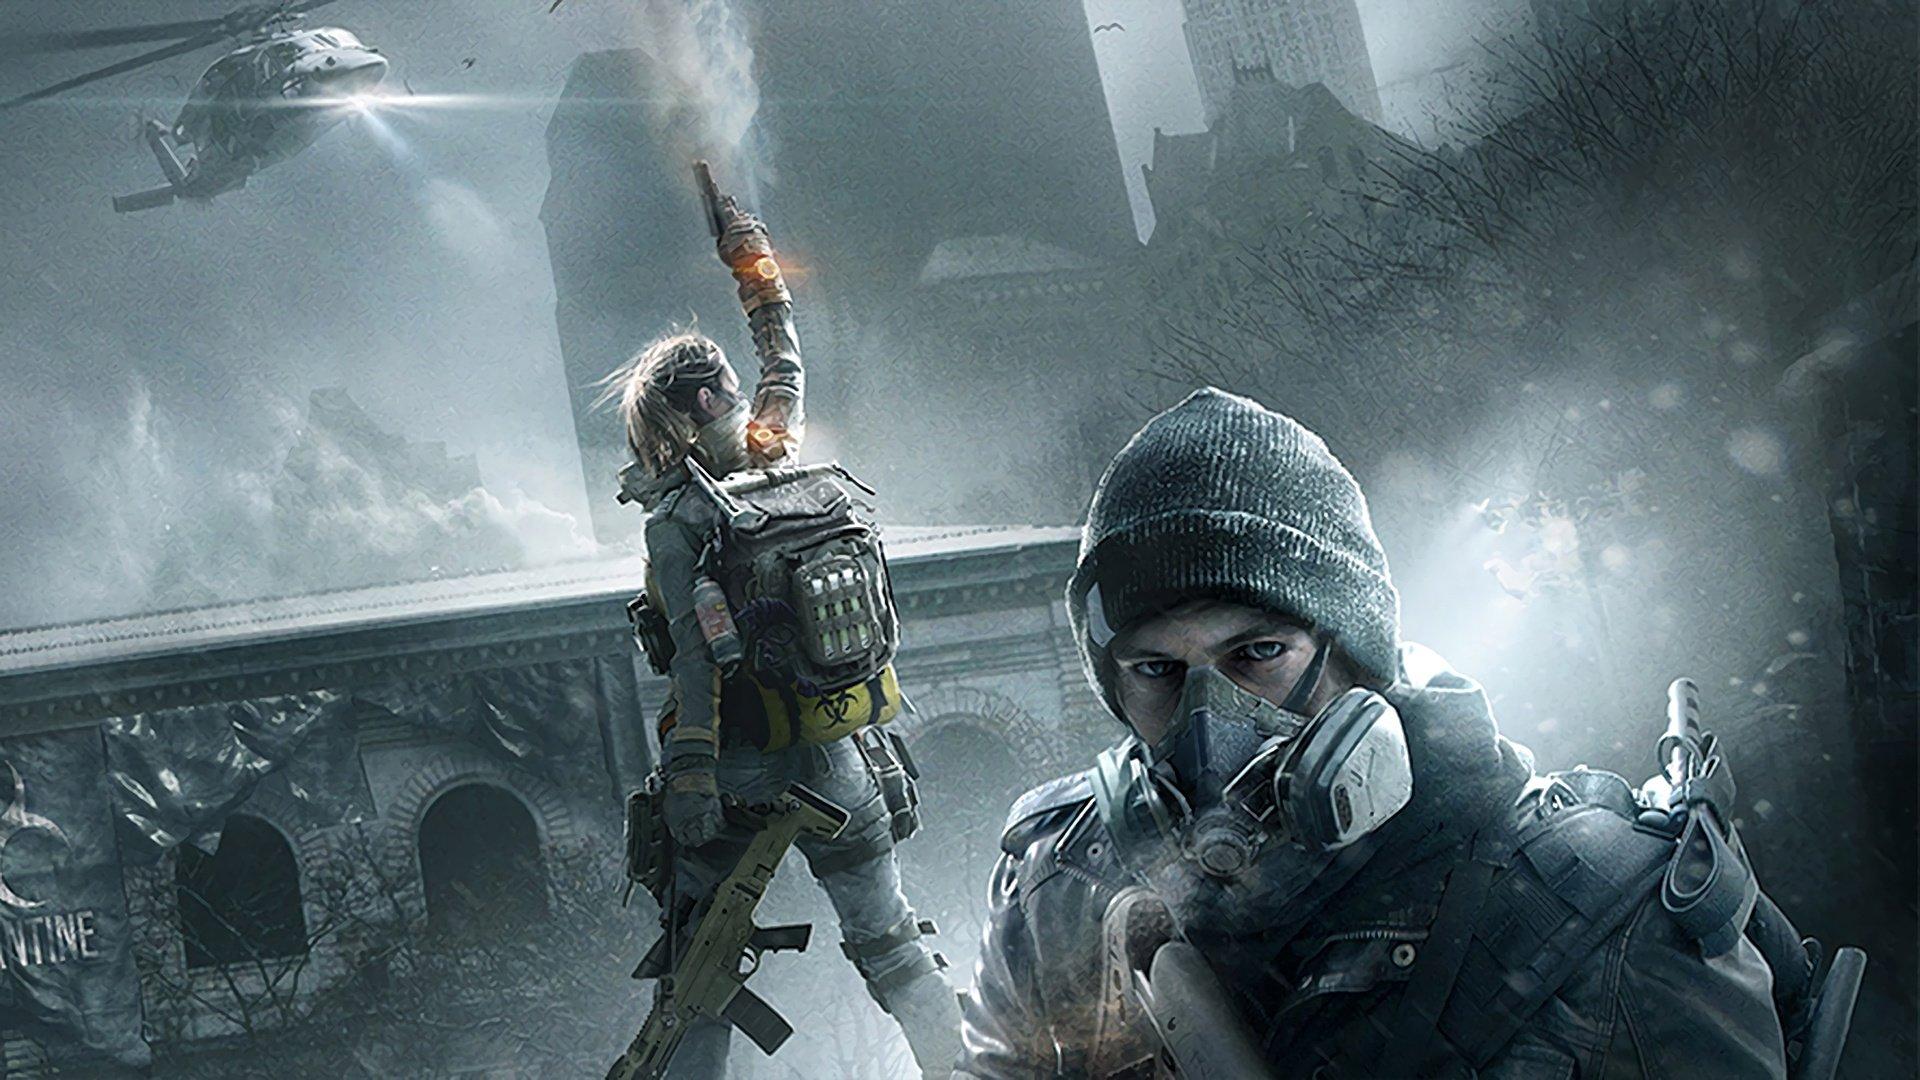 The Division 4K Wallpaper Free The Division 4K